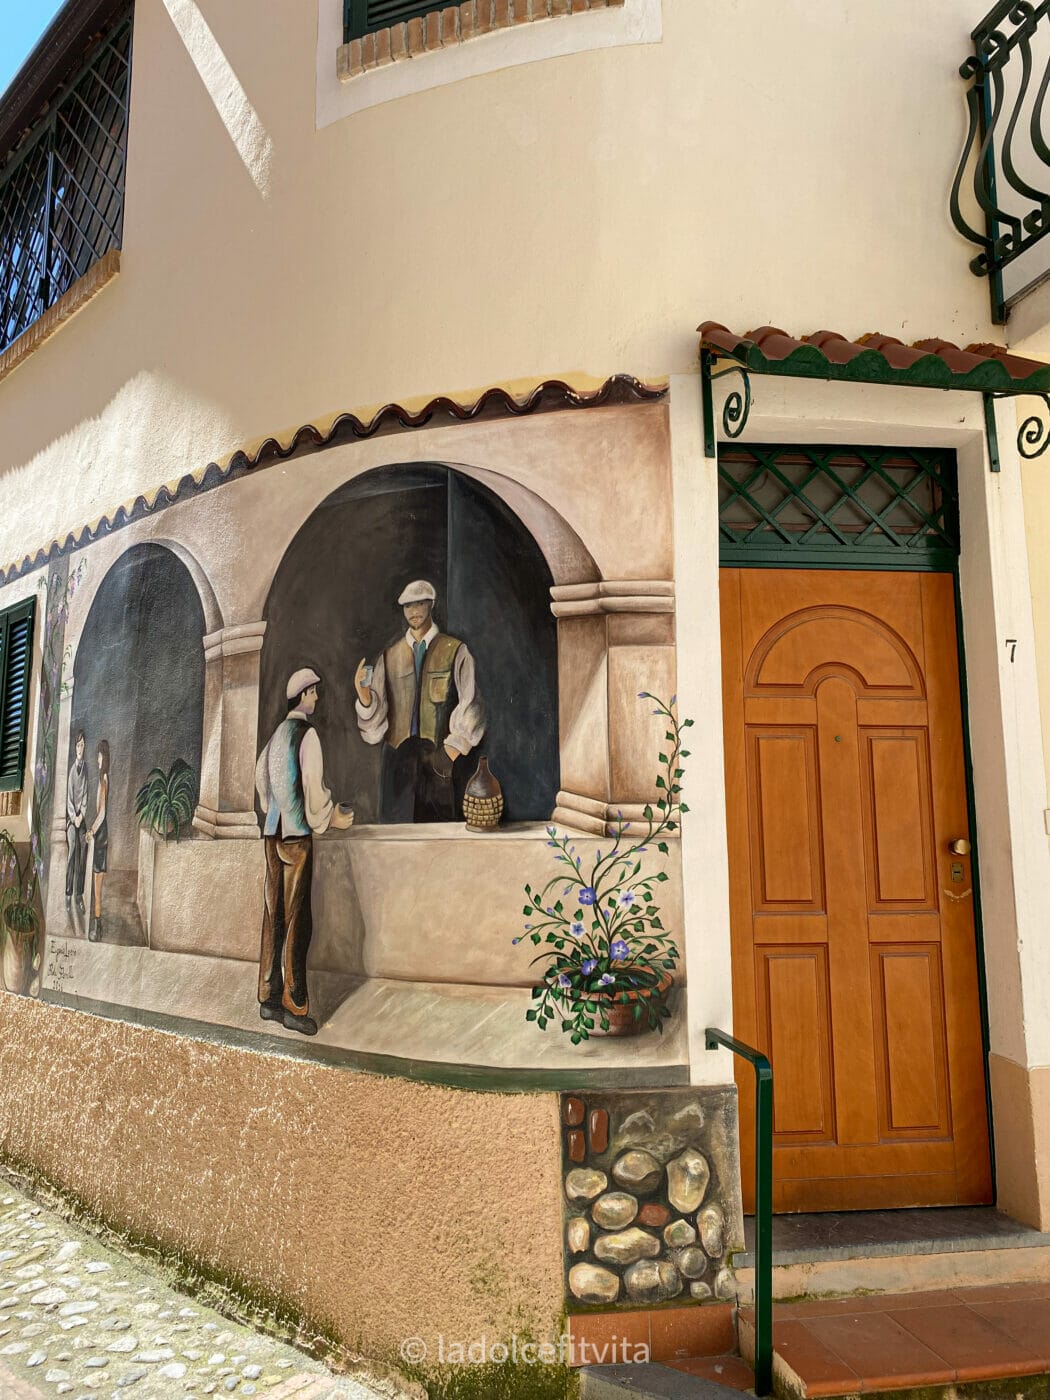 a bakery painted on a wall as a mural in Diamante Italy